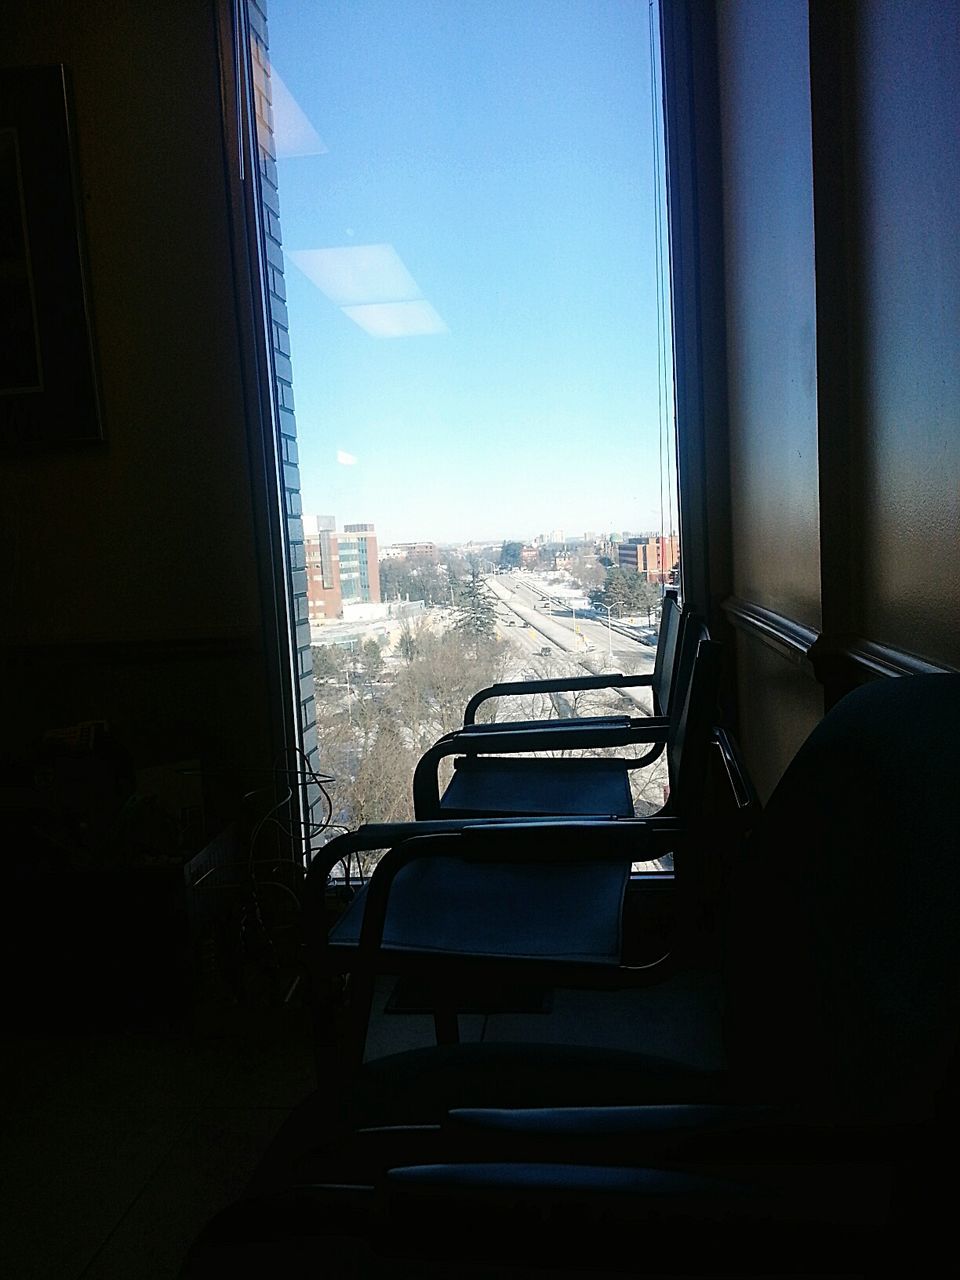 Empty chairs with city view through window